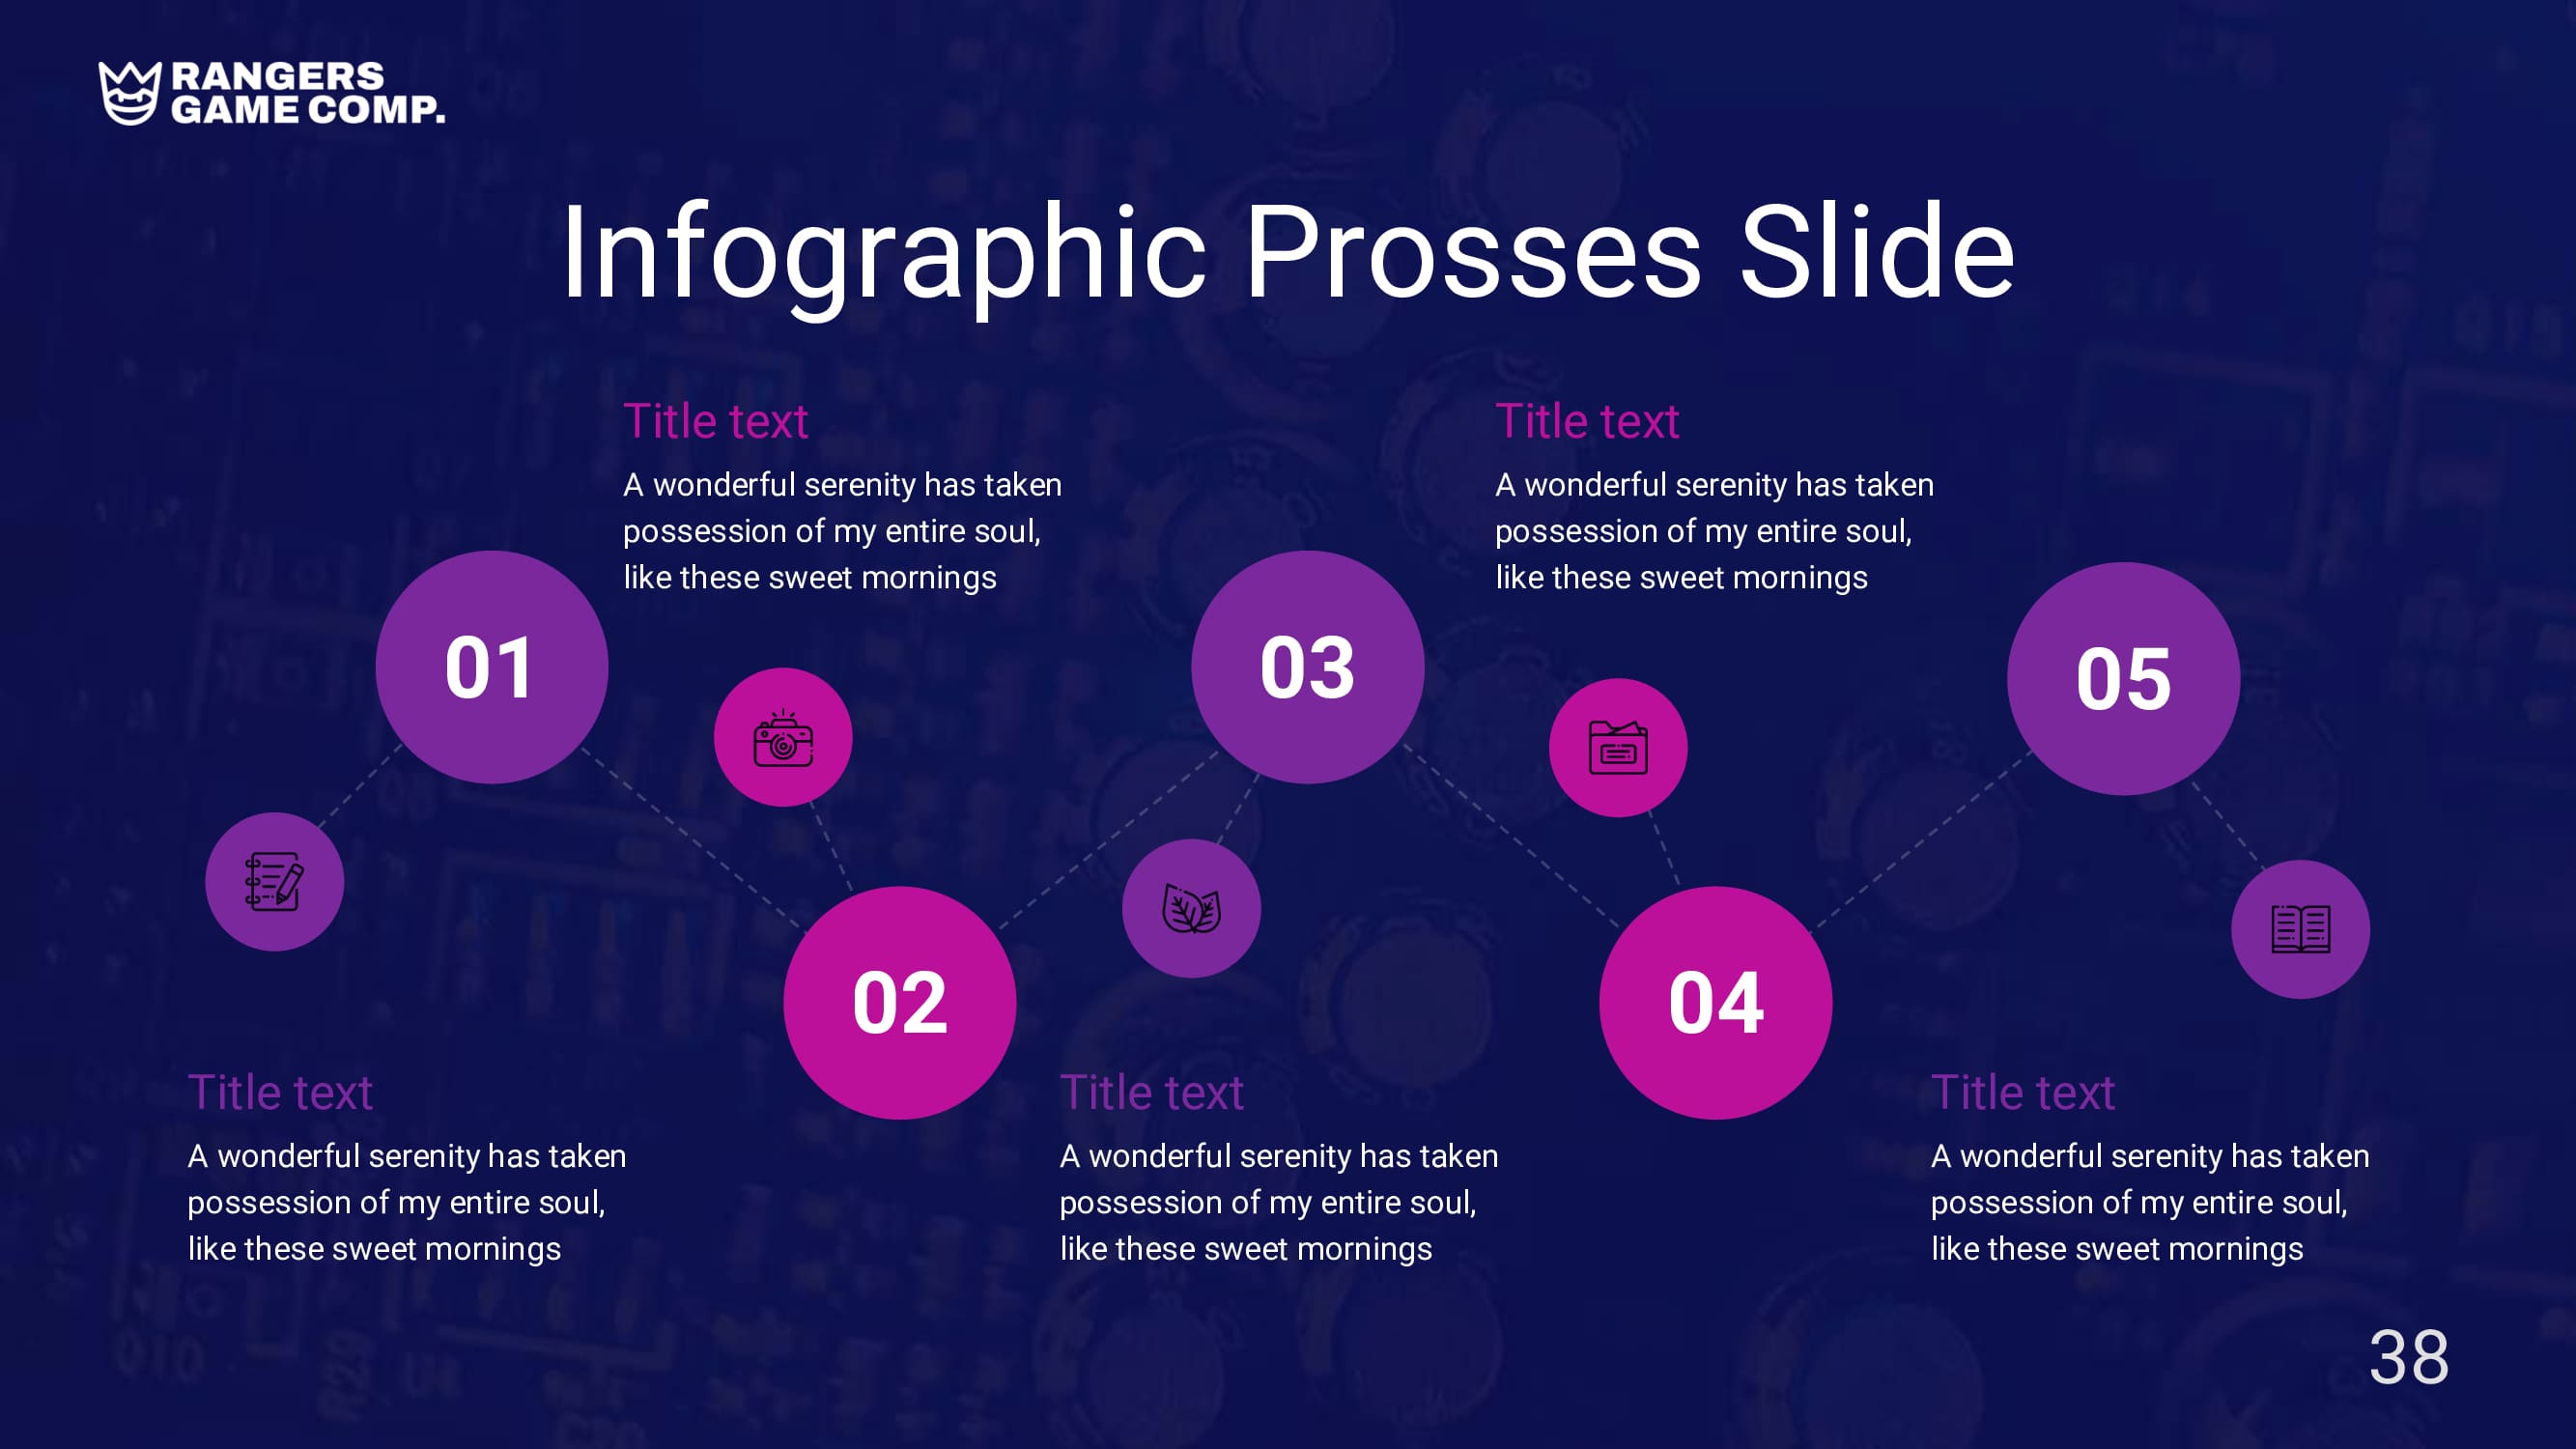 A slide of infographic processes with 5 blocks of text description.